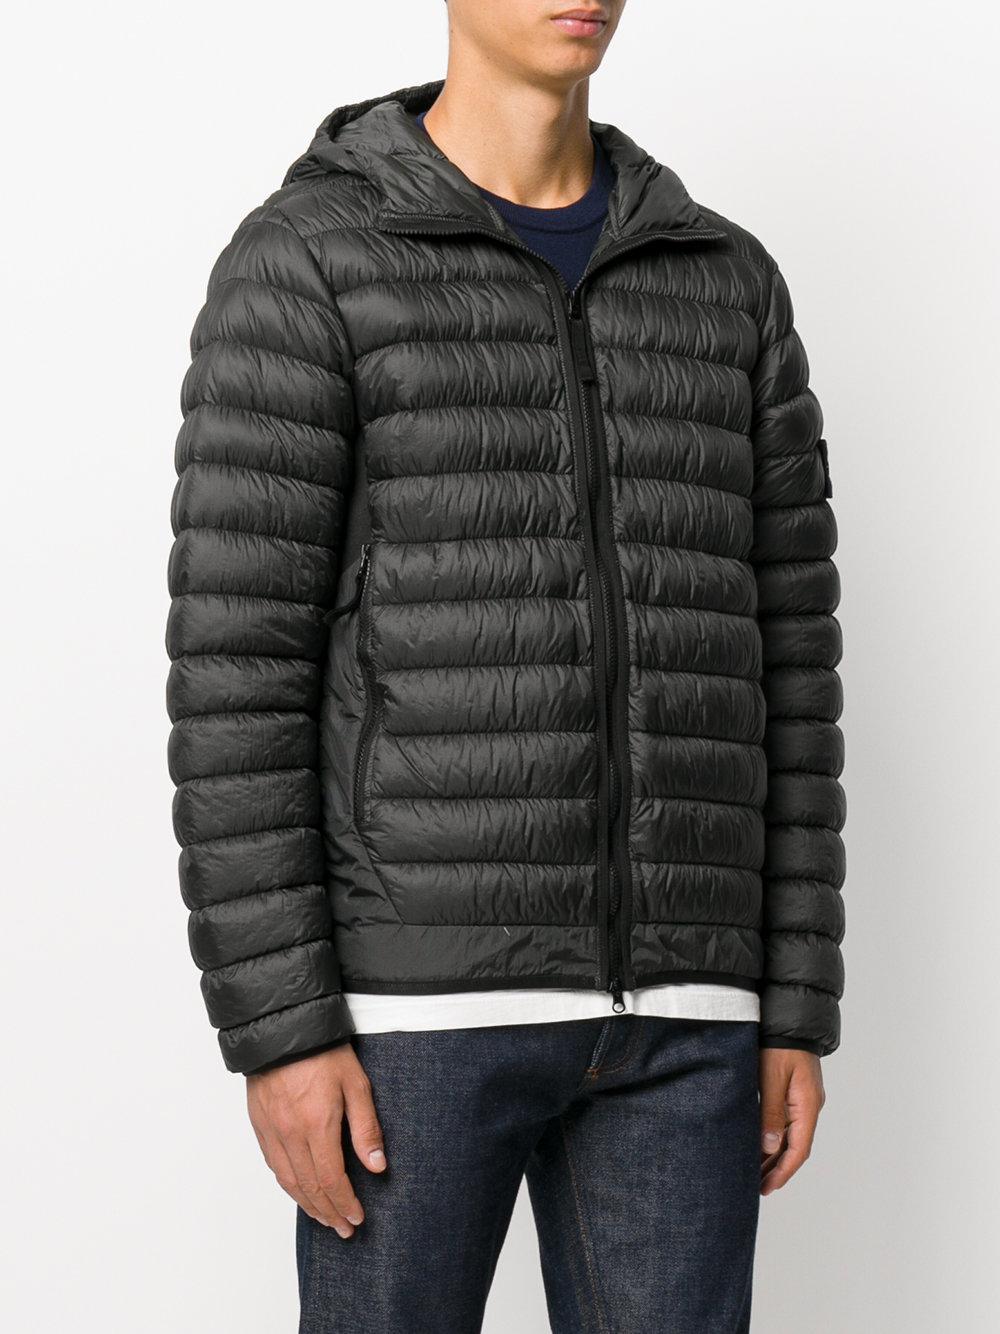 Lyst - Stone Island Hooded Padded Jacket in Gray for Men